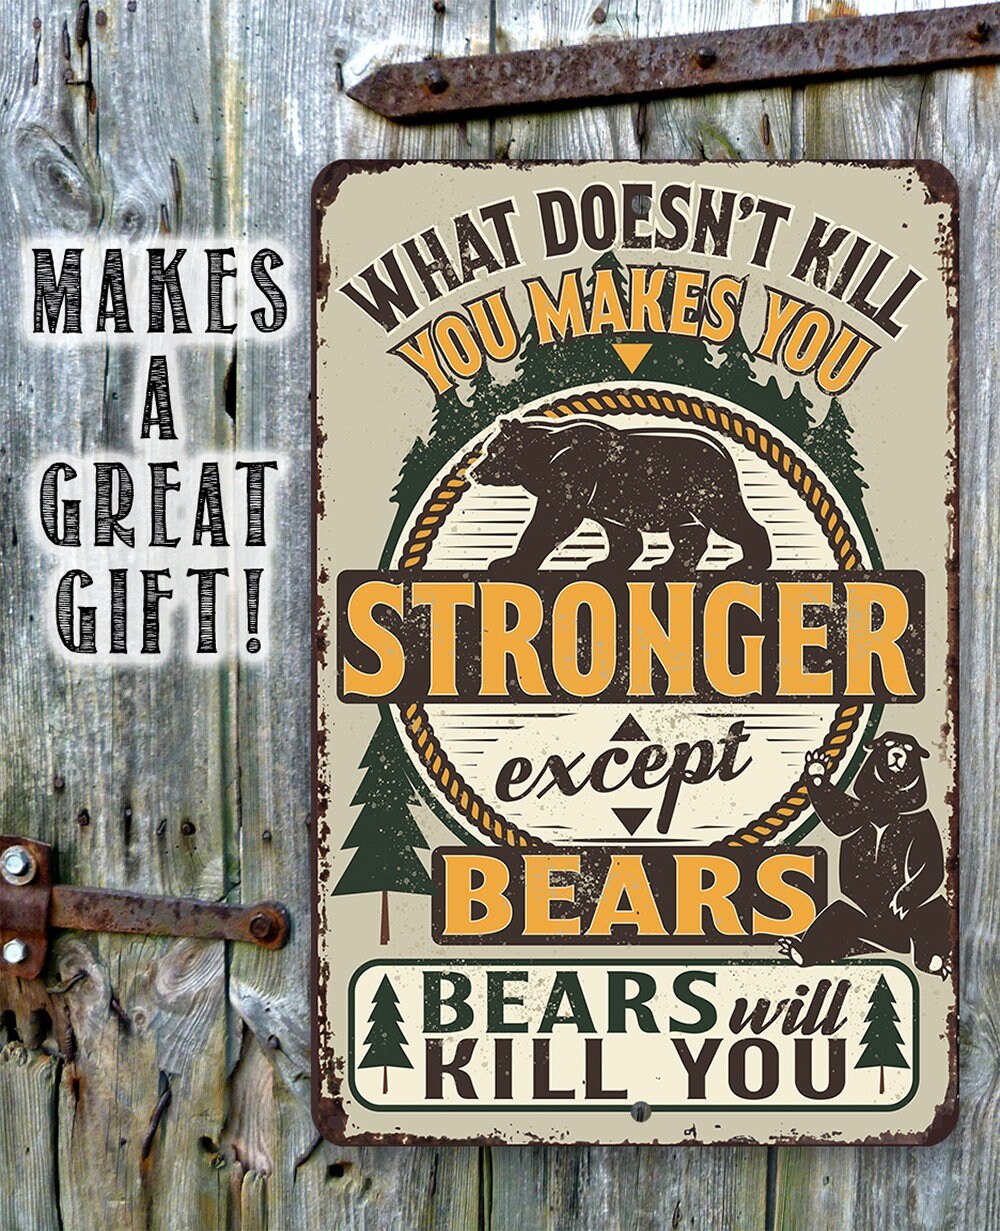 What Doesn't Kill You Makes You Stronger Except Bears - 8" x 12" or 12" x 18" Aluminum Tin Awesome Metal Poster Lone Star Art 